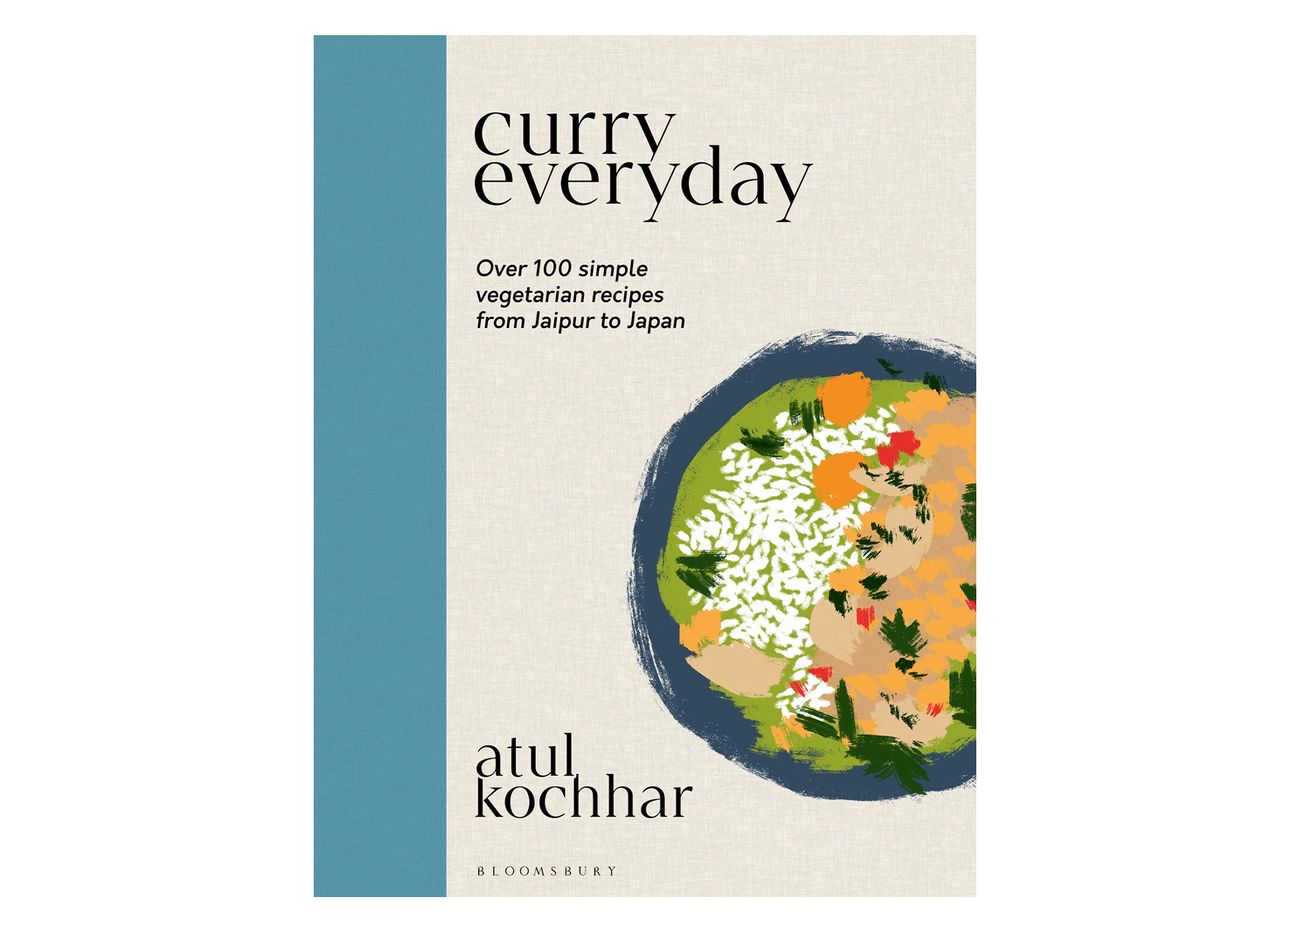 Cover of “Curry Everyday: Over 100 Simple Vegetarian Recipes From Jaipur to Japan” by Atul Kochhar